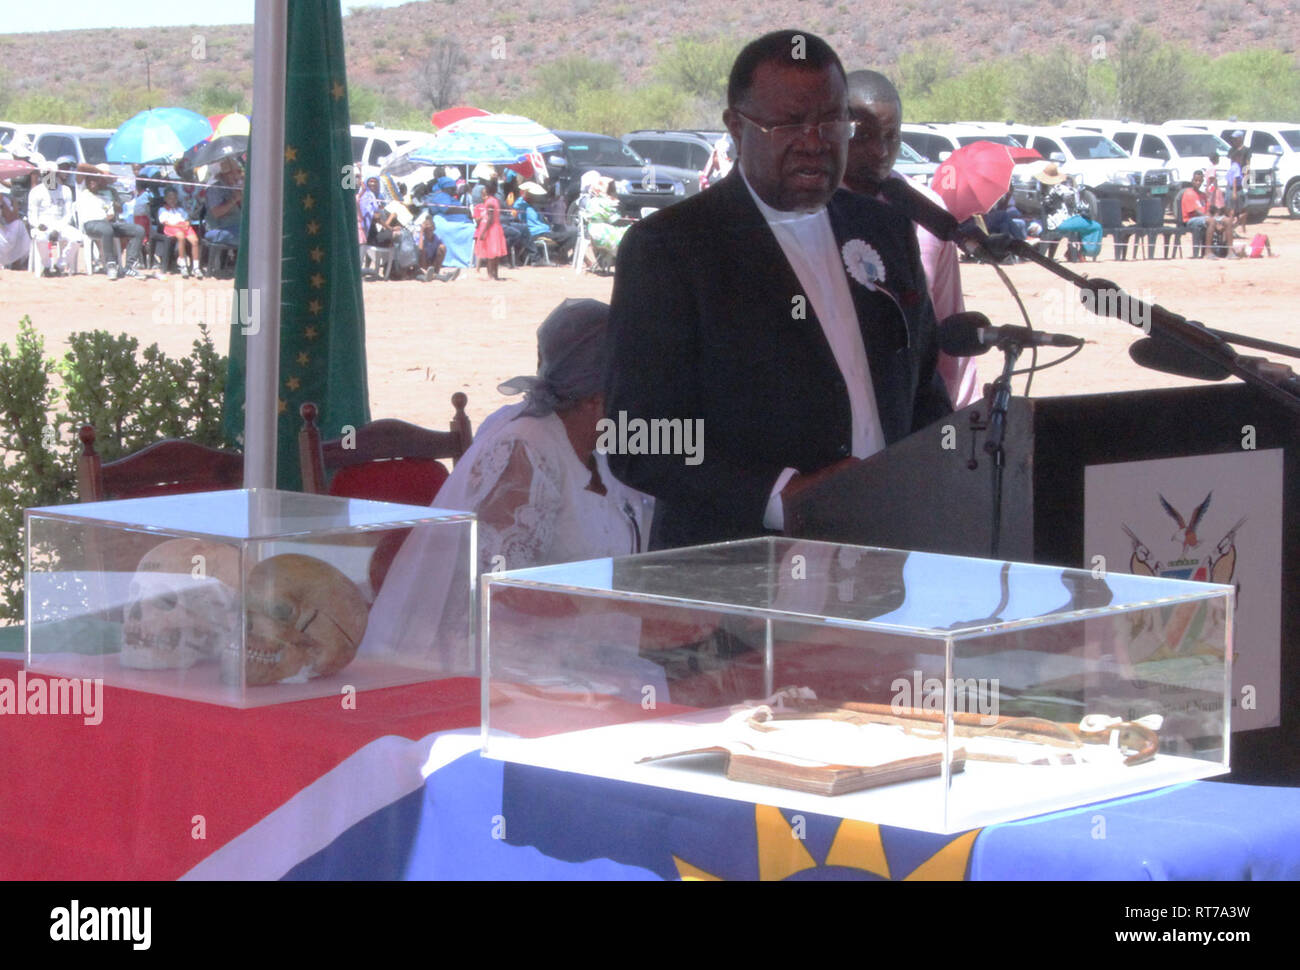 HANDOUT - 28 February 2019, Namibia, Gibeon: Namibia's head of state Hage Geingob speaks at the handover of cultural assets stolen during colonial times. The two objects, a whip and a Bible, belonged to Hendrik Witbooi, a leader of the Nama people and Namibian national hero. So far they have been stored in the Linden Museum in Stuttgart. (to dpa 'Baden-Württemberg gives important cultural assets back to Namibia' from 28.02.2019) Photo: Frank Steffen/Allgemeine Zeitung Namibia/dpa - ATTENTION: Only for editorial use in connection with the current reporting and only with complete mention of the Stock Photo